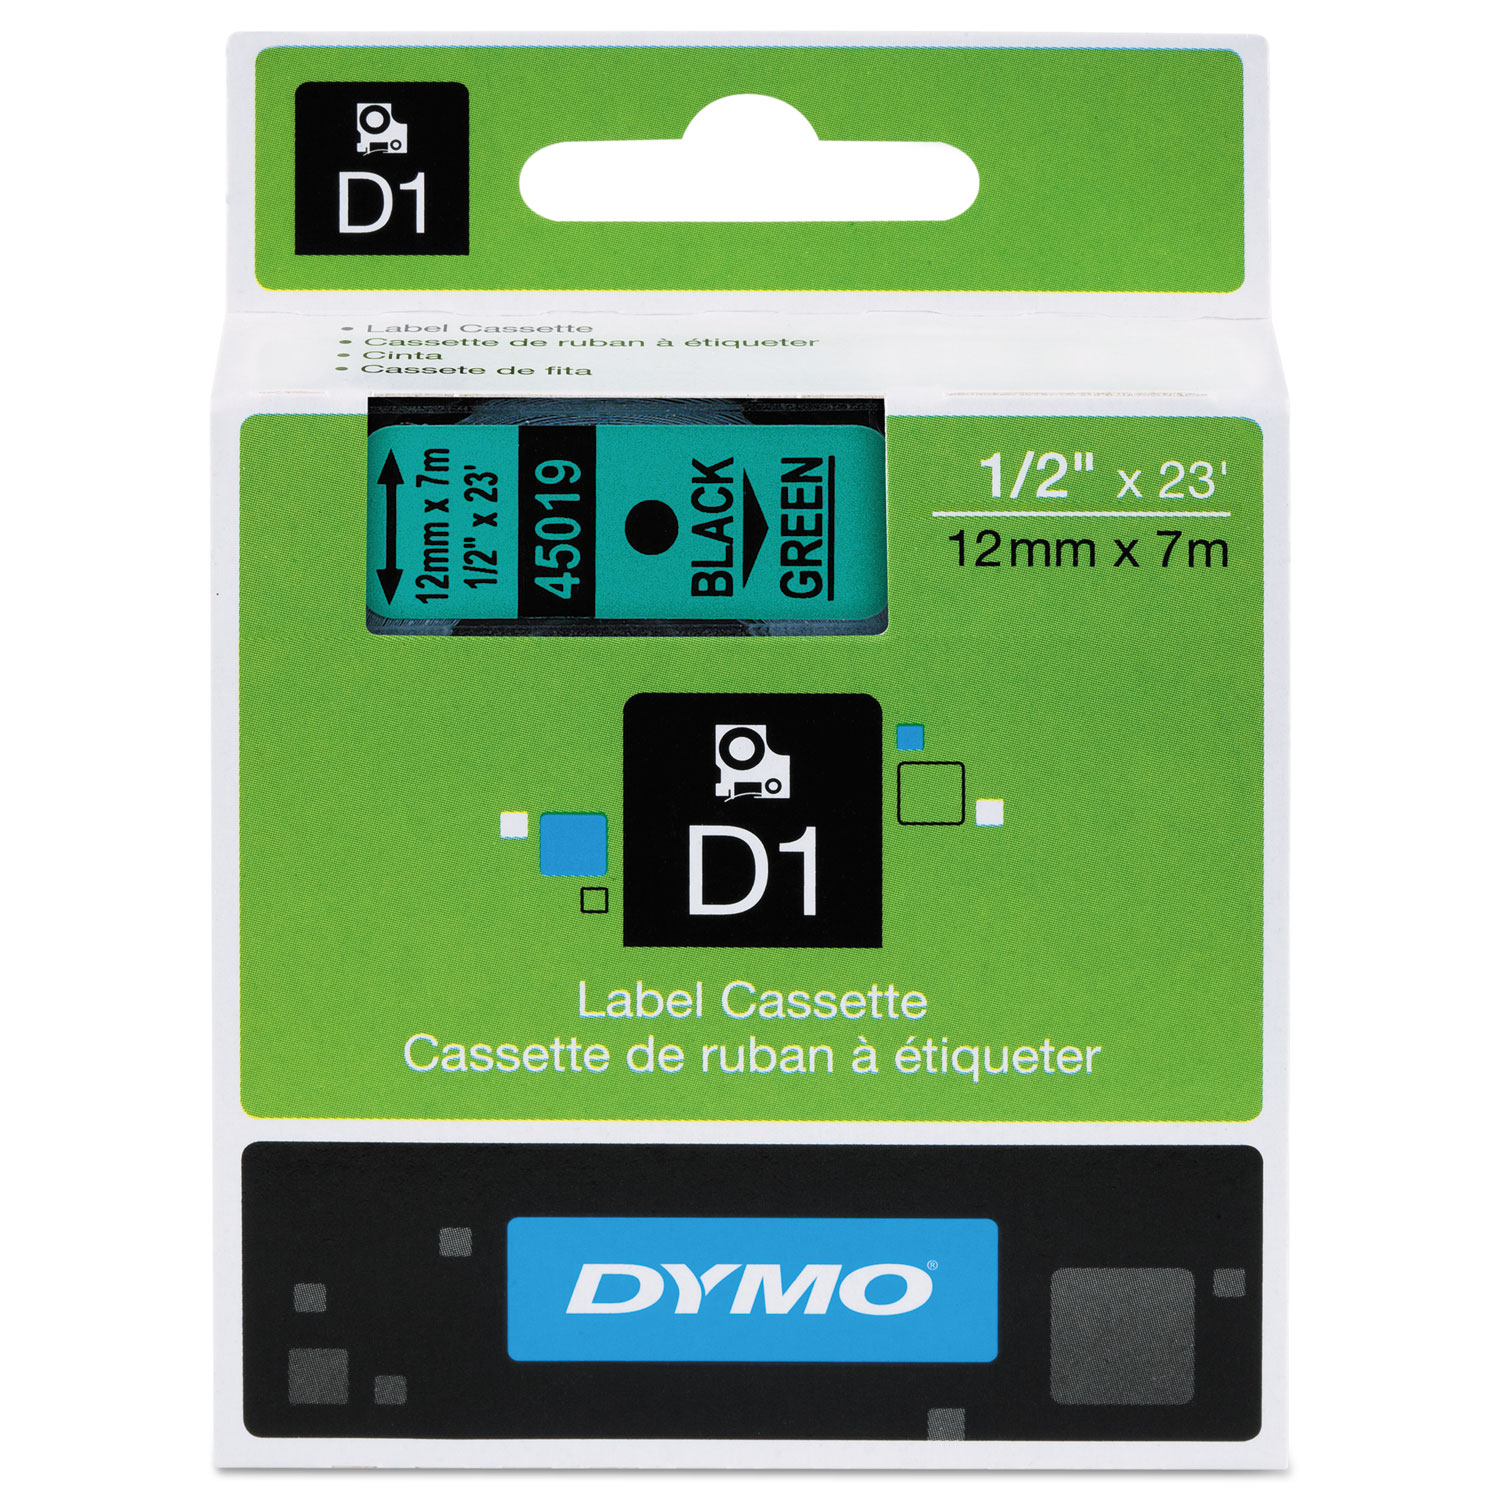  DYMO 45019 D1 High-Performance Polyester Removable Label Tape, 0.5 x 23 ft, Black on Green (DYM45019) 